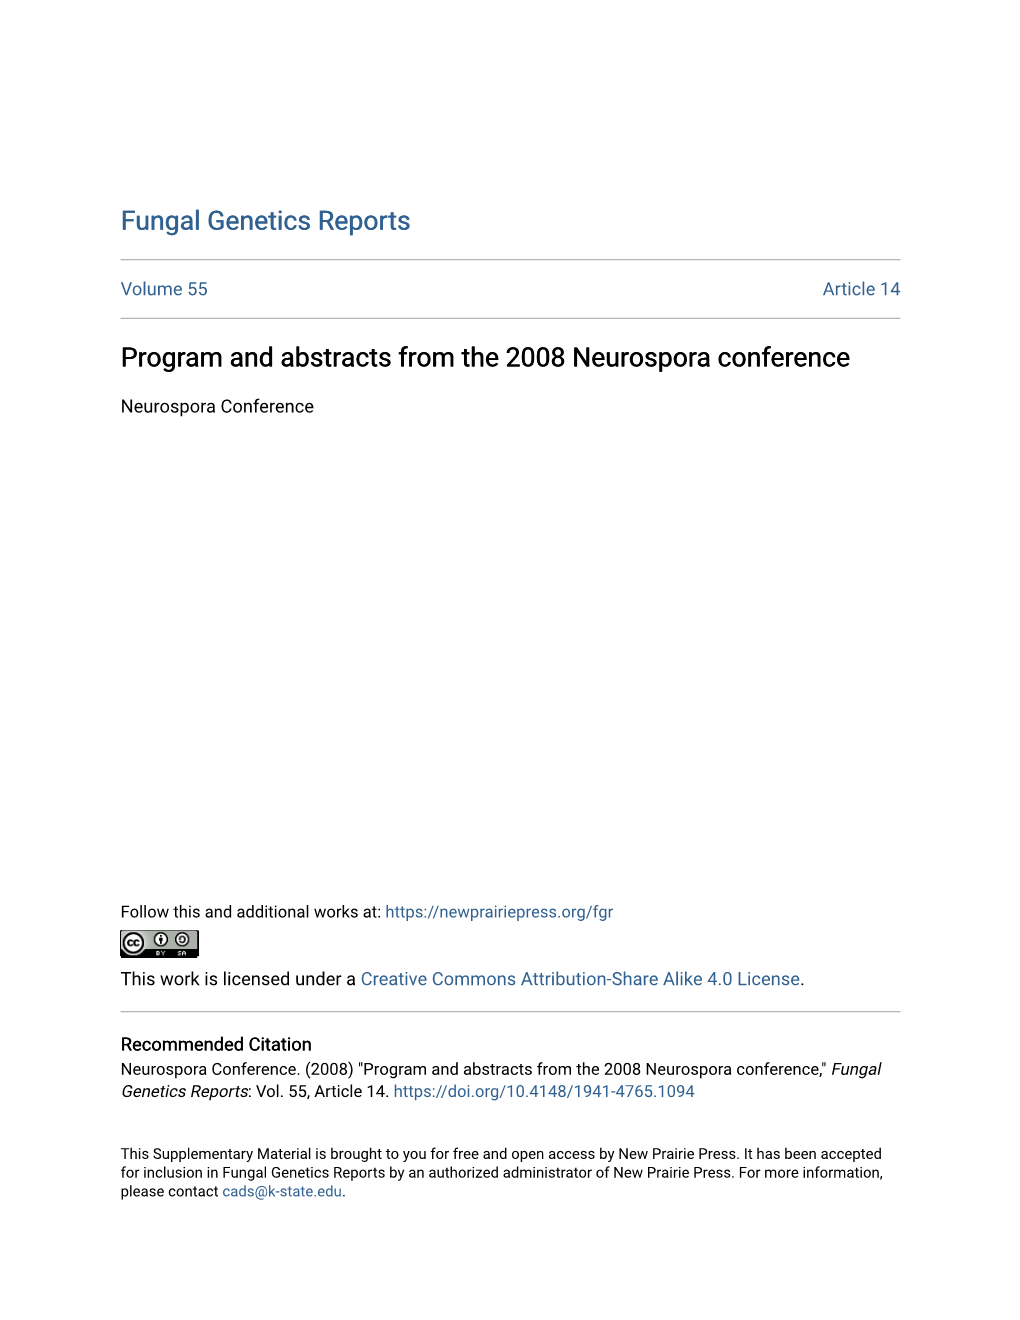 Program and Abstracts from the 2008 Neurospora Conference